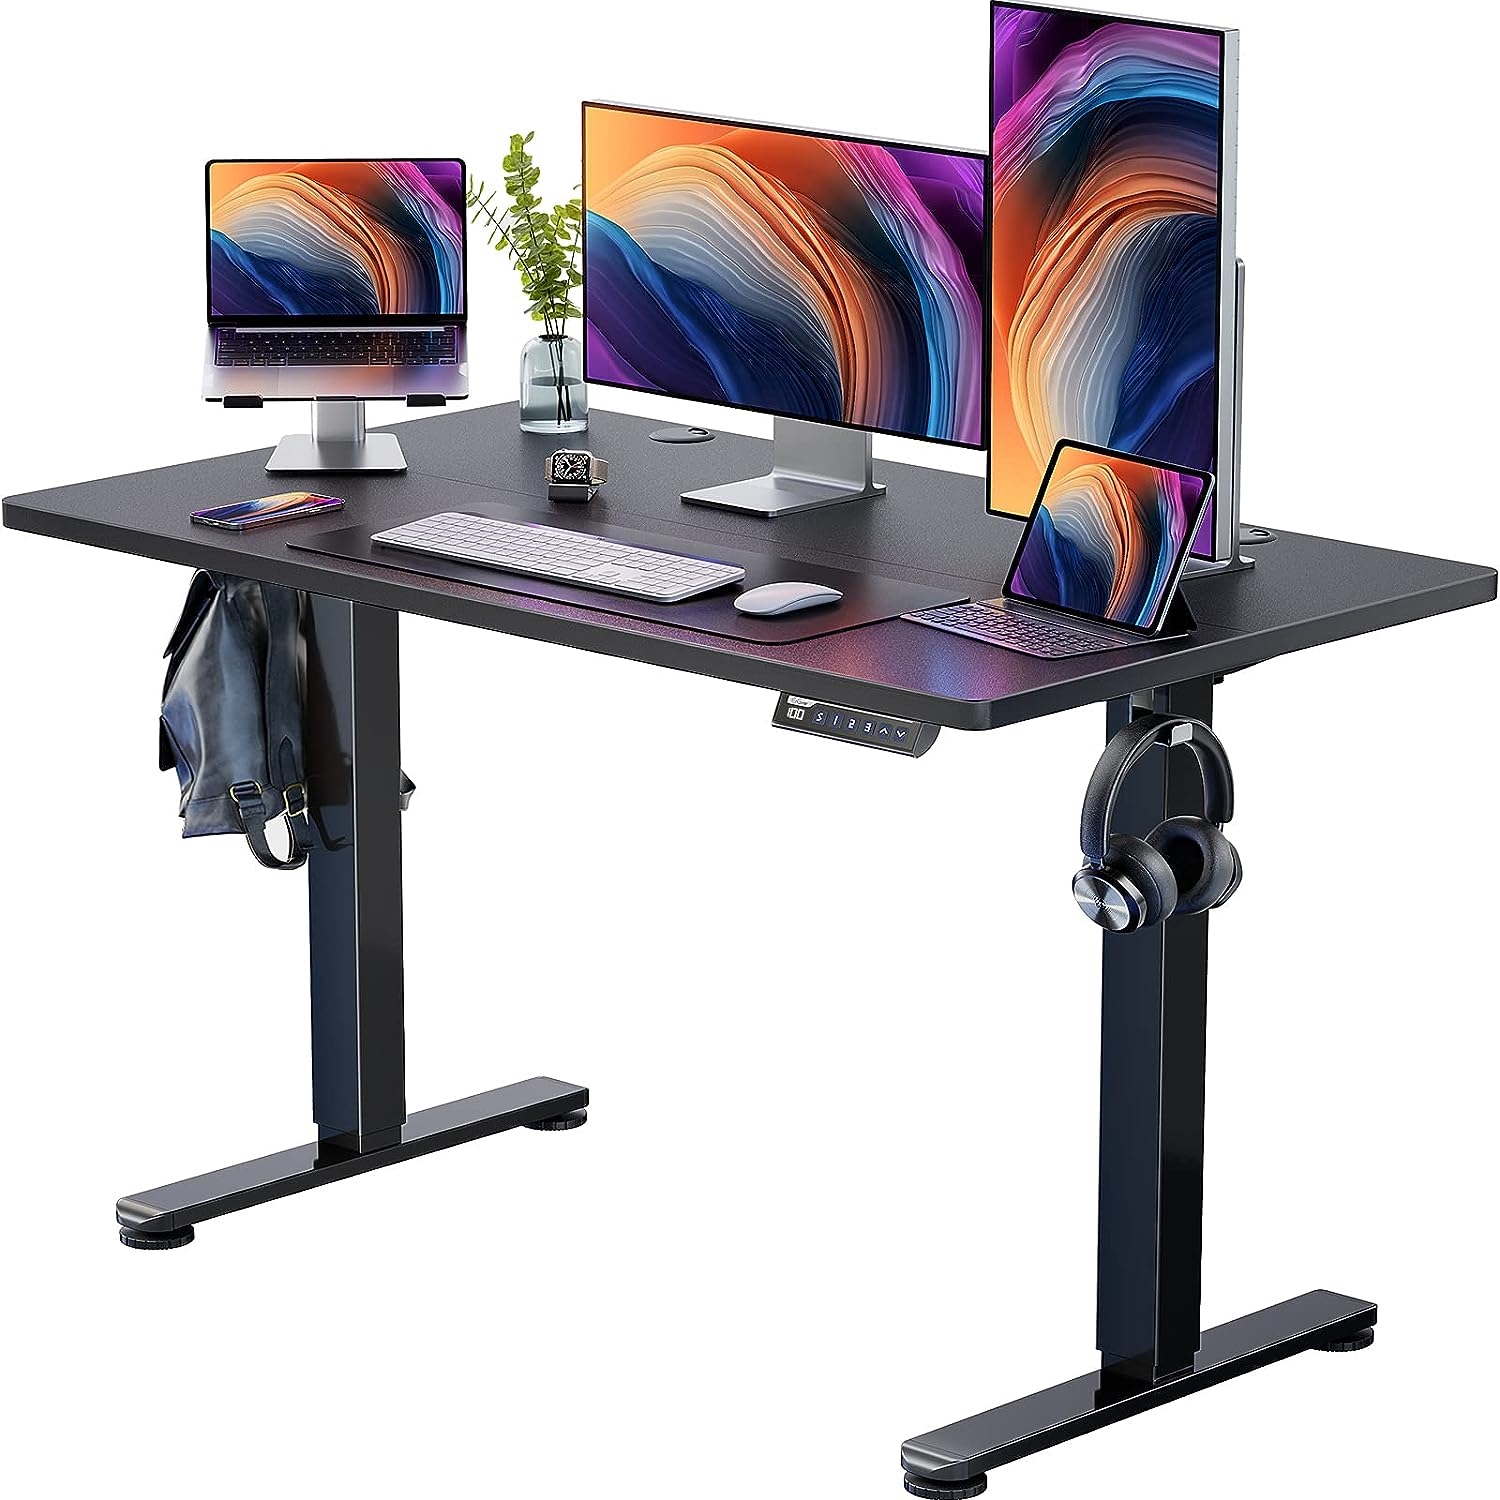 ErGear Height Adjustable Electric Standing Desk | DeviceDaily.com